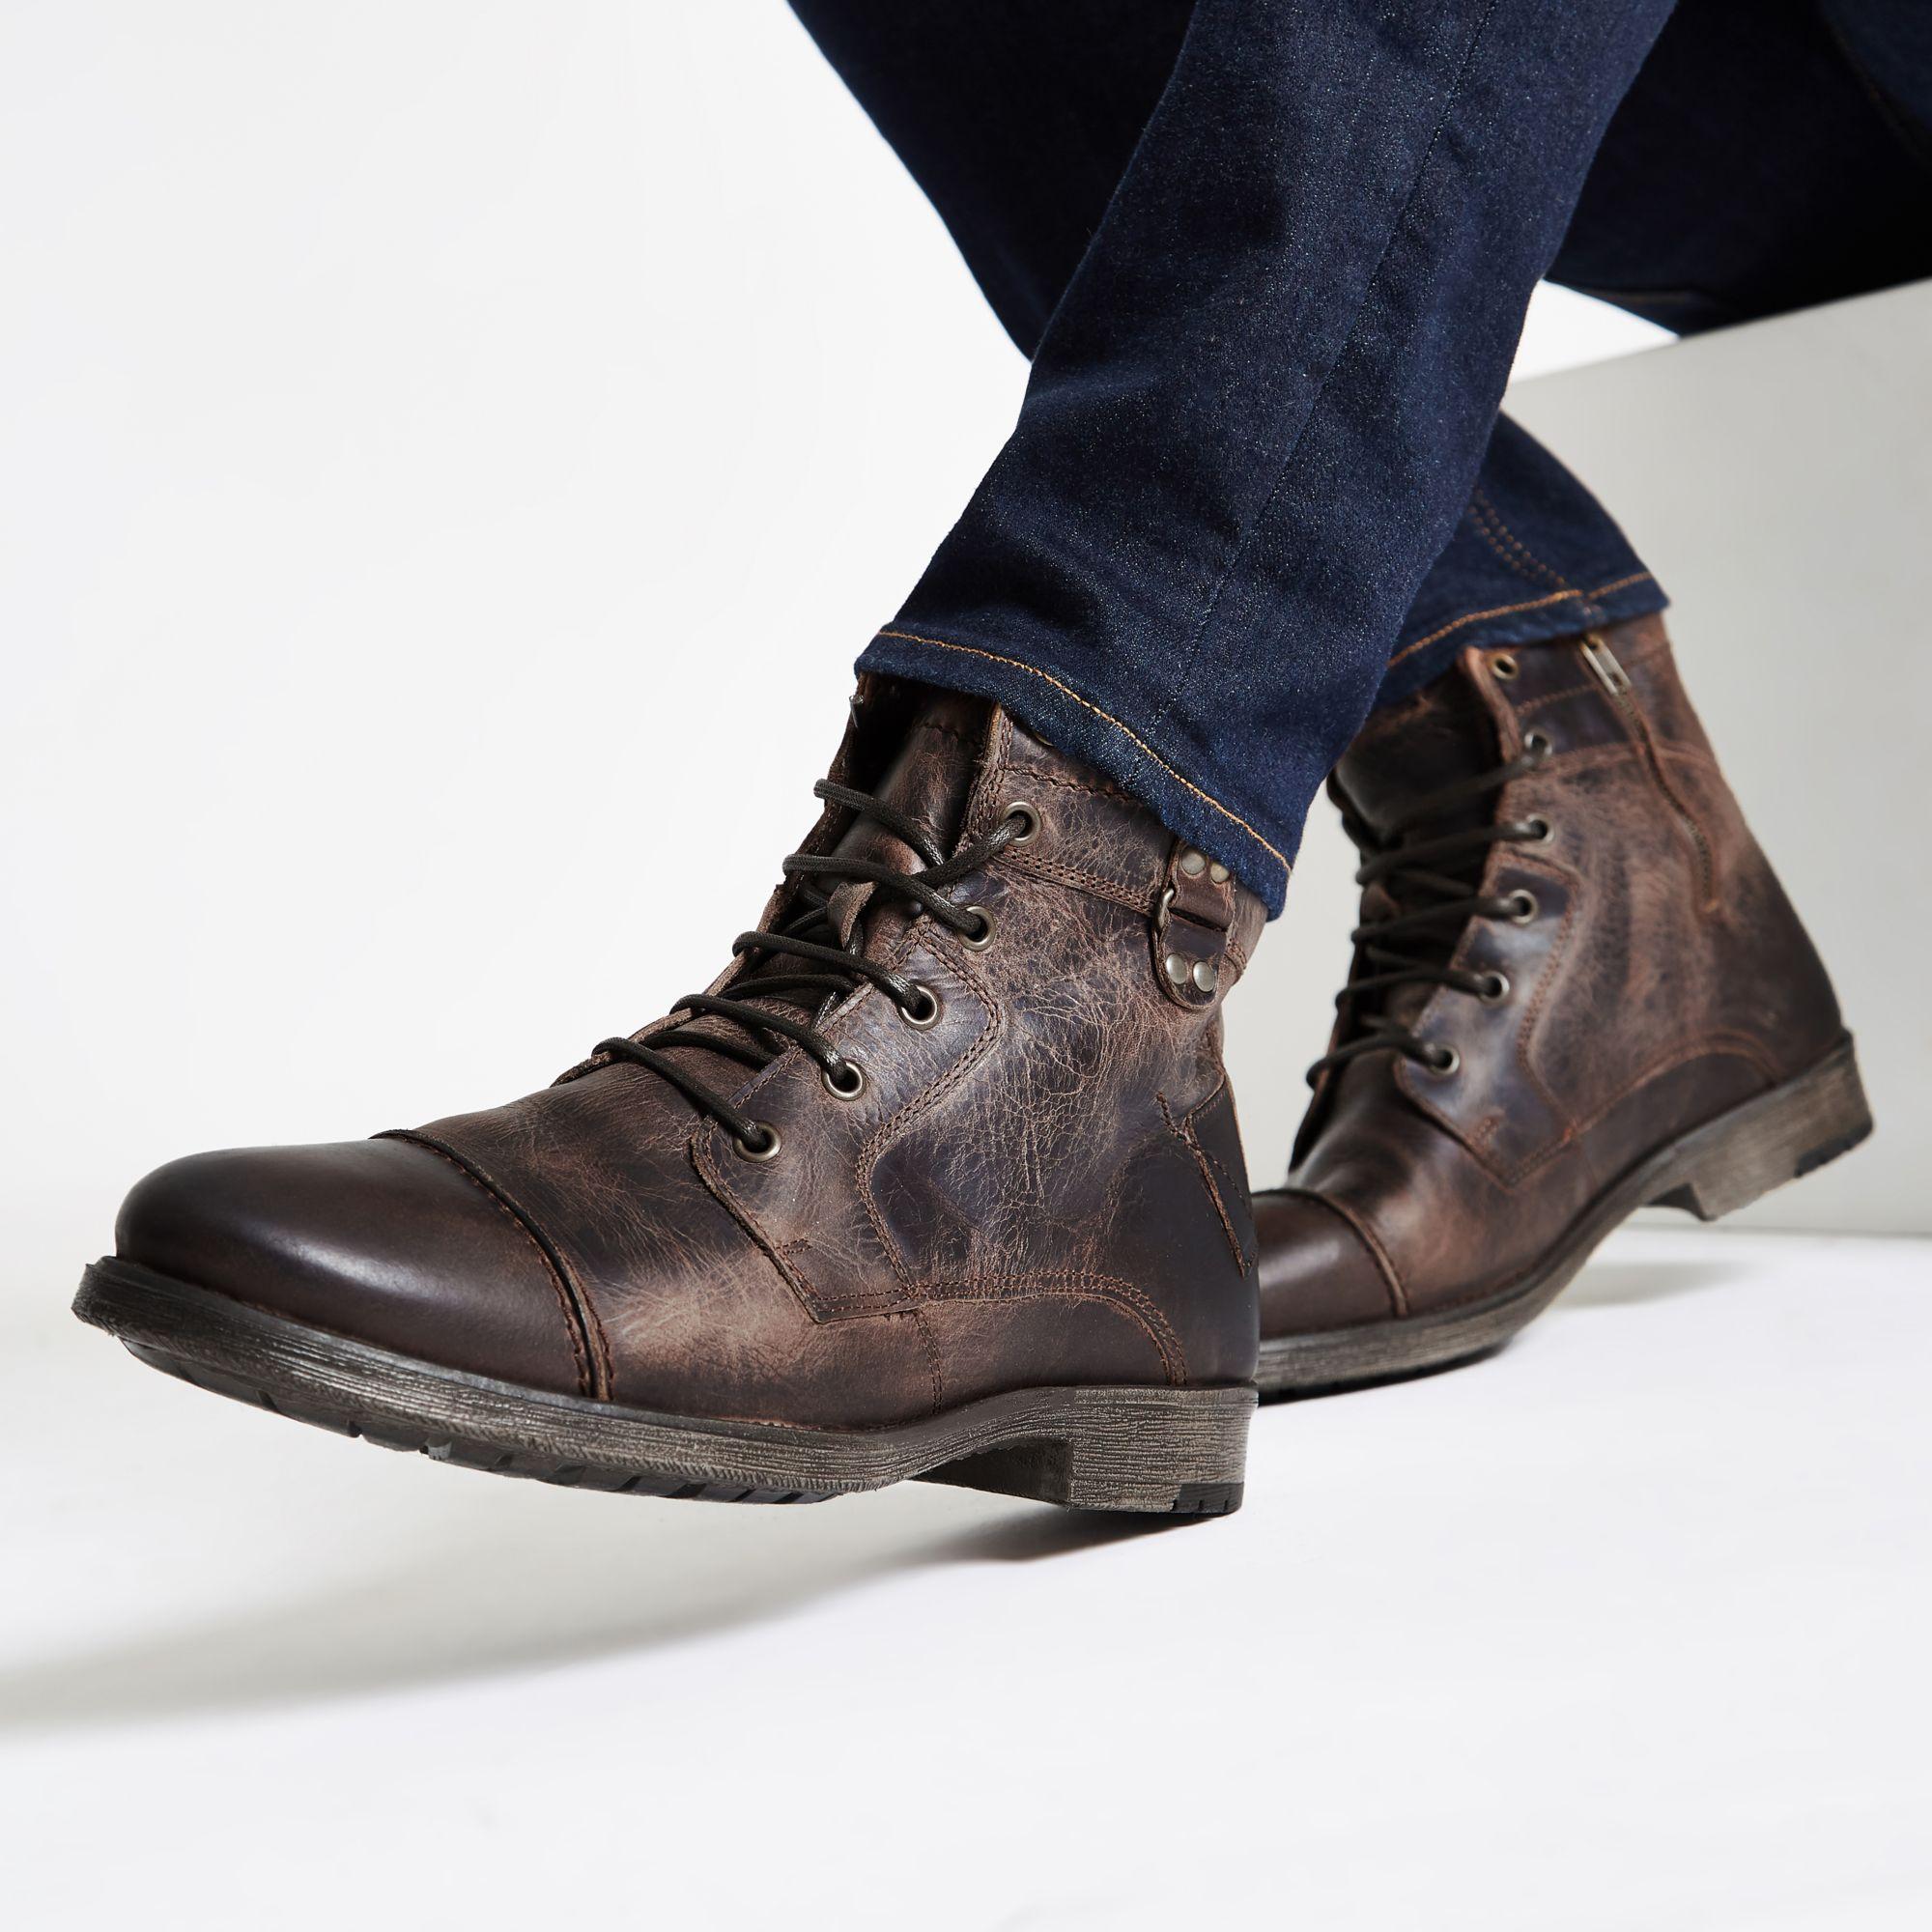 River Island Mens Brown Boots | vlr.eng.br